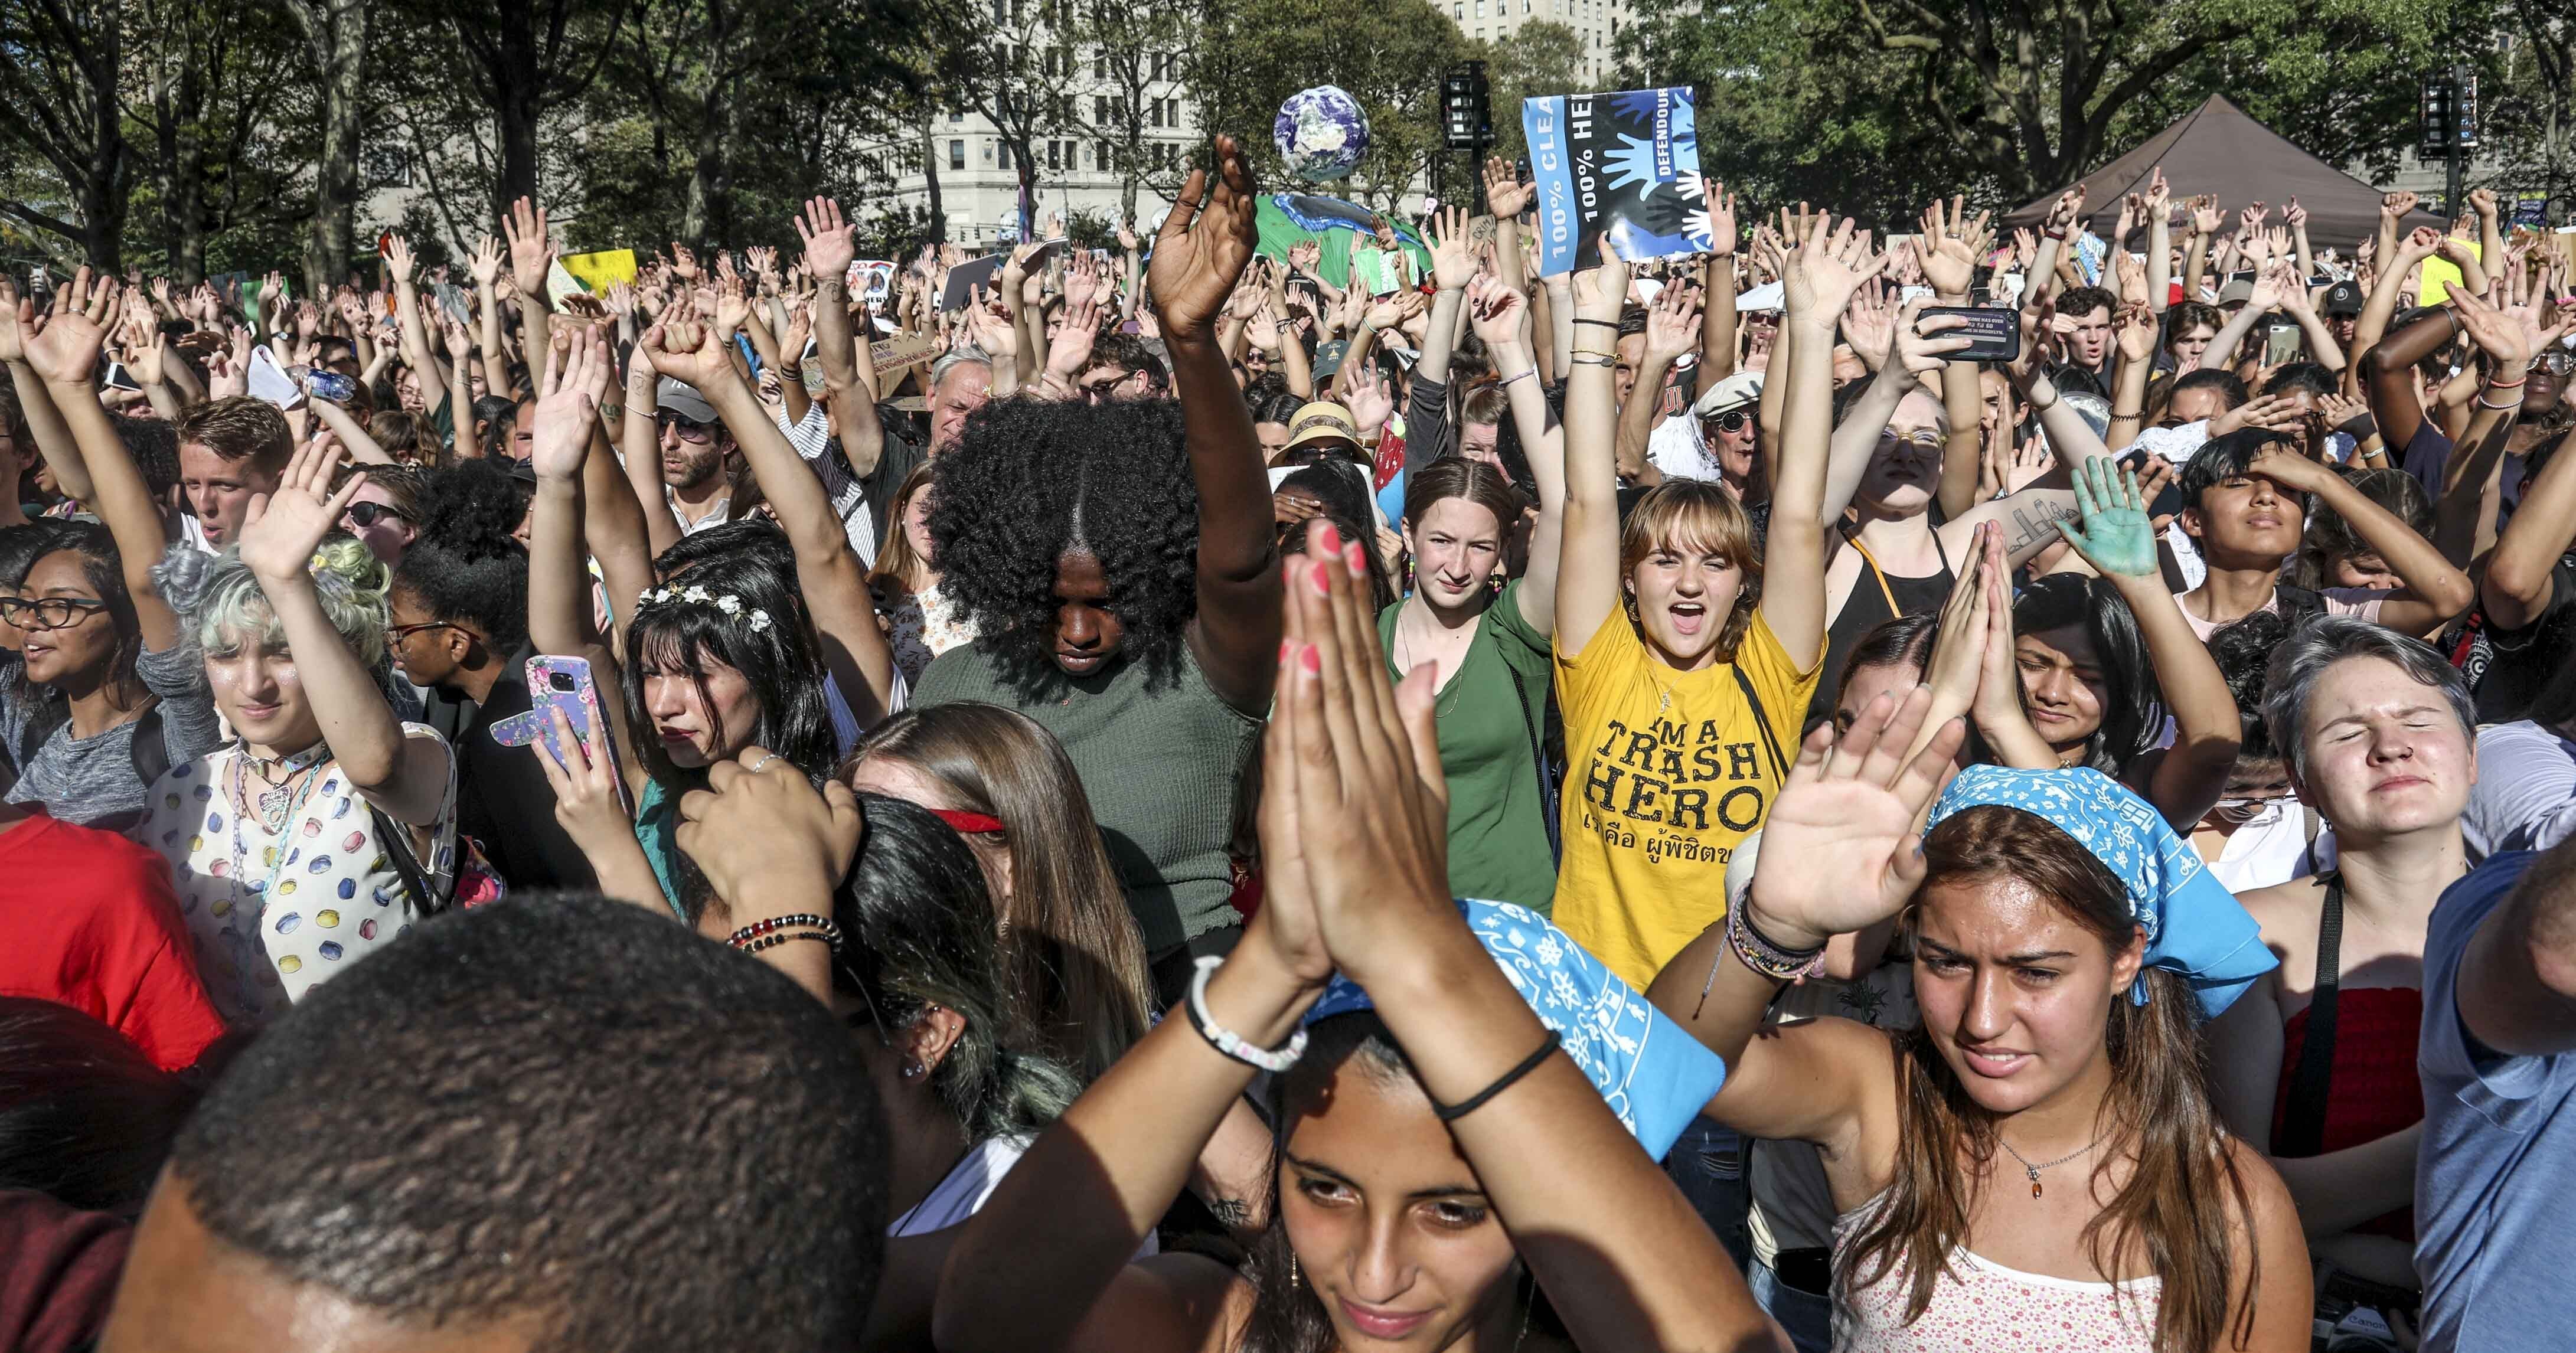 Climate change activists show hands in support of climate action during a climate strike rally, as part of a global youth-led day of global action.